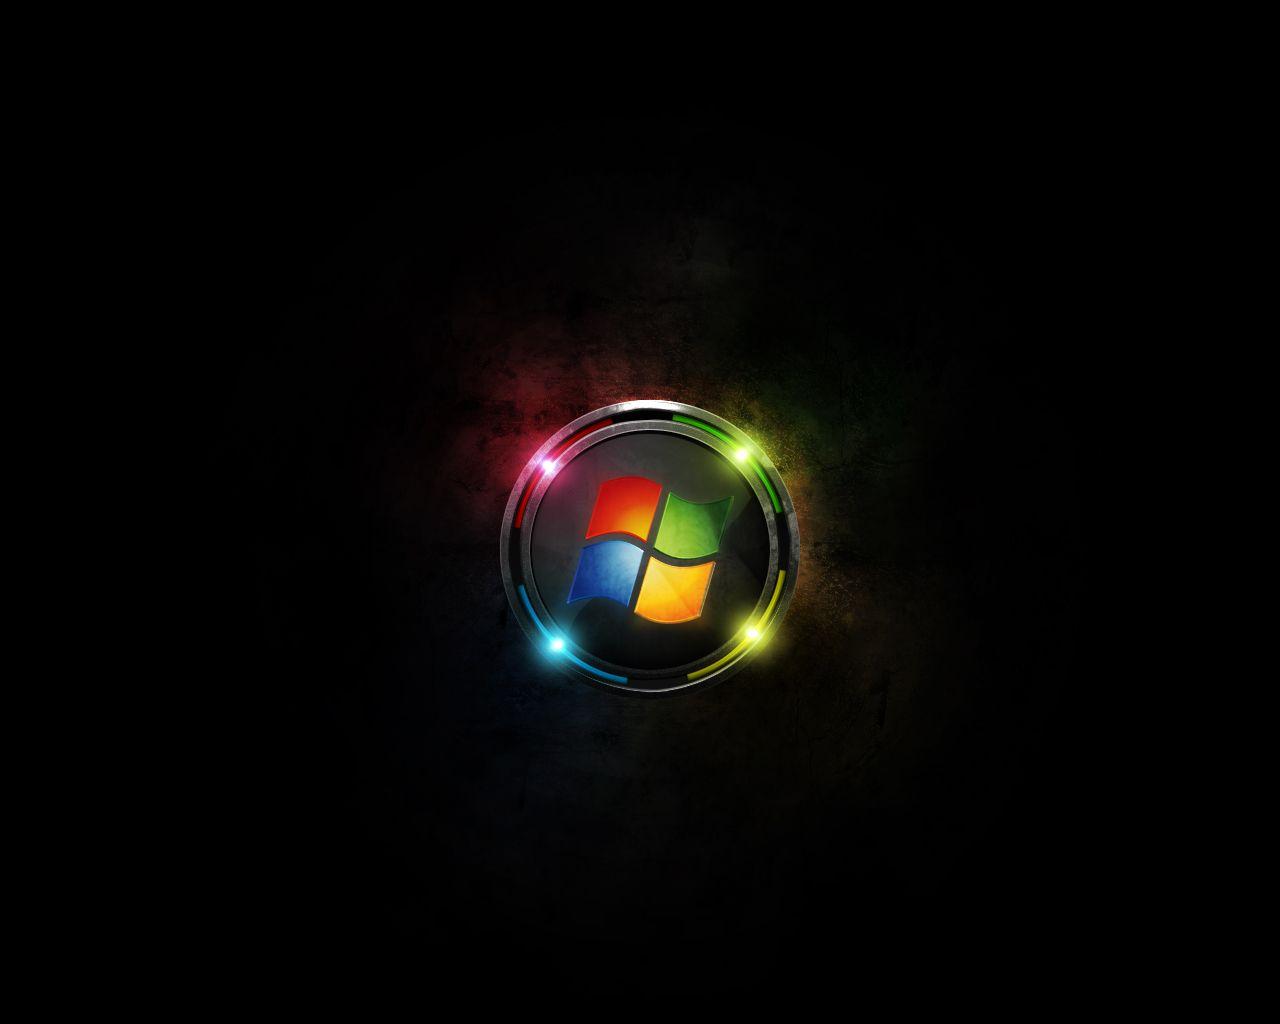 Windows Wallpapers 8 cool hd 22383 HD Wallpapers